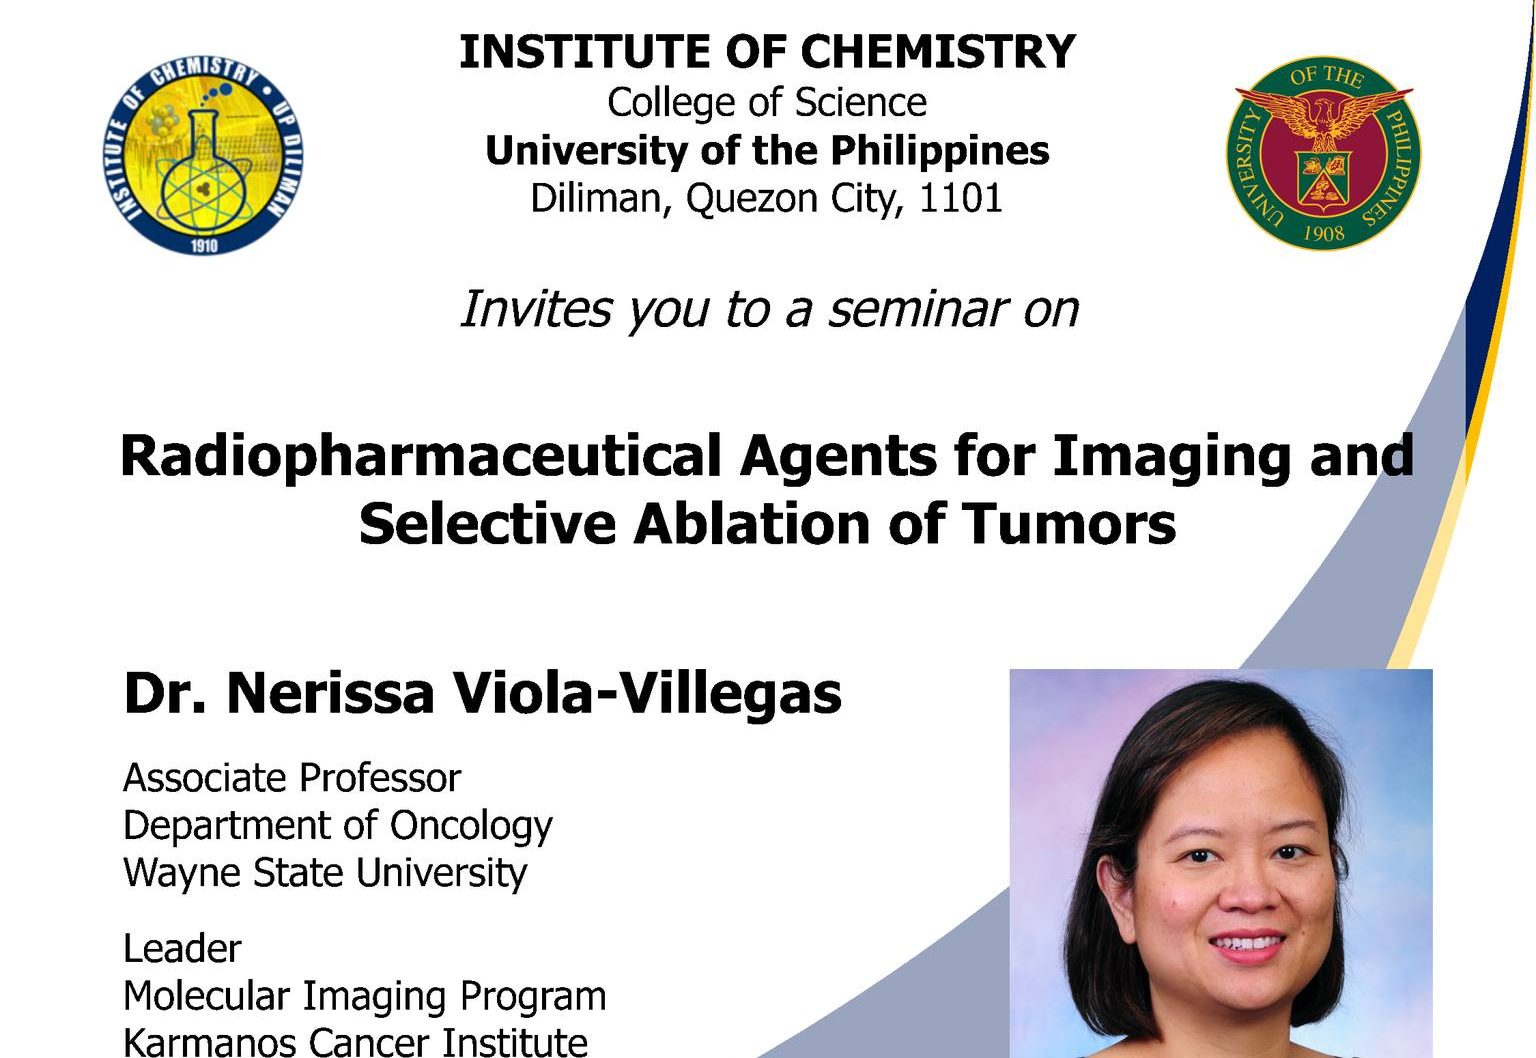 Radiopharmaceutical Agents for Imaging and Selective Ablation of Tumors